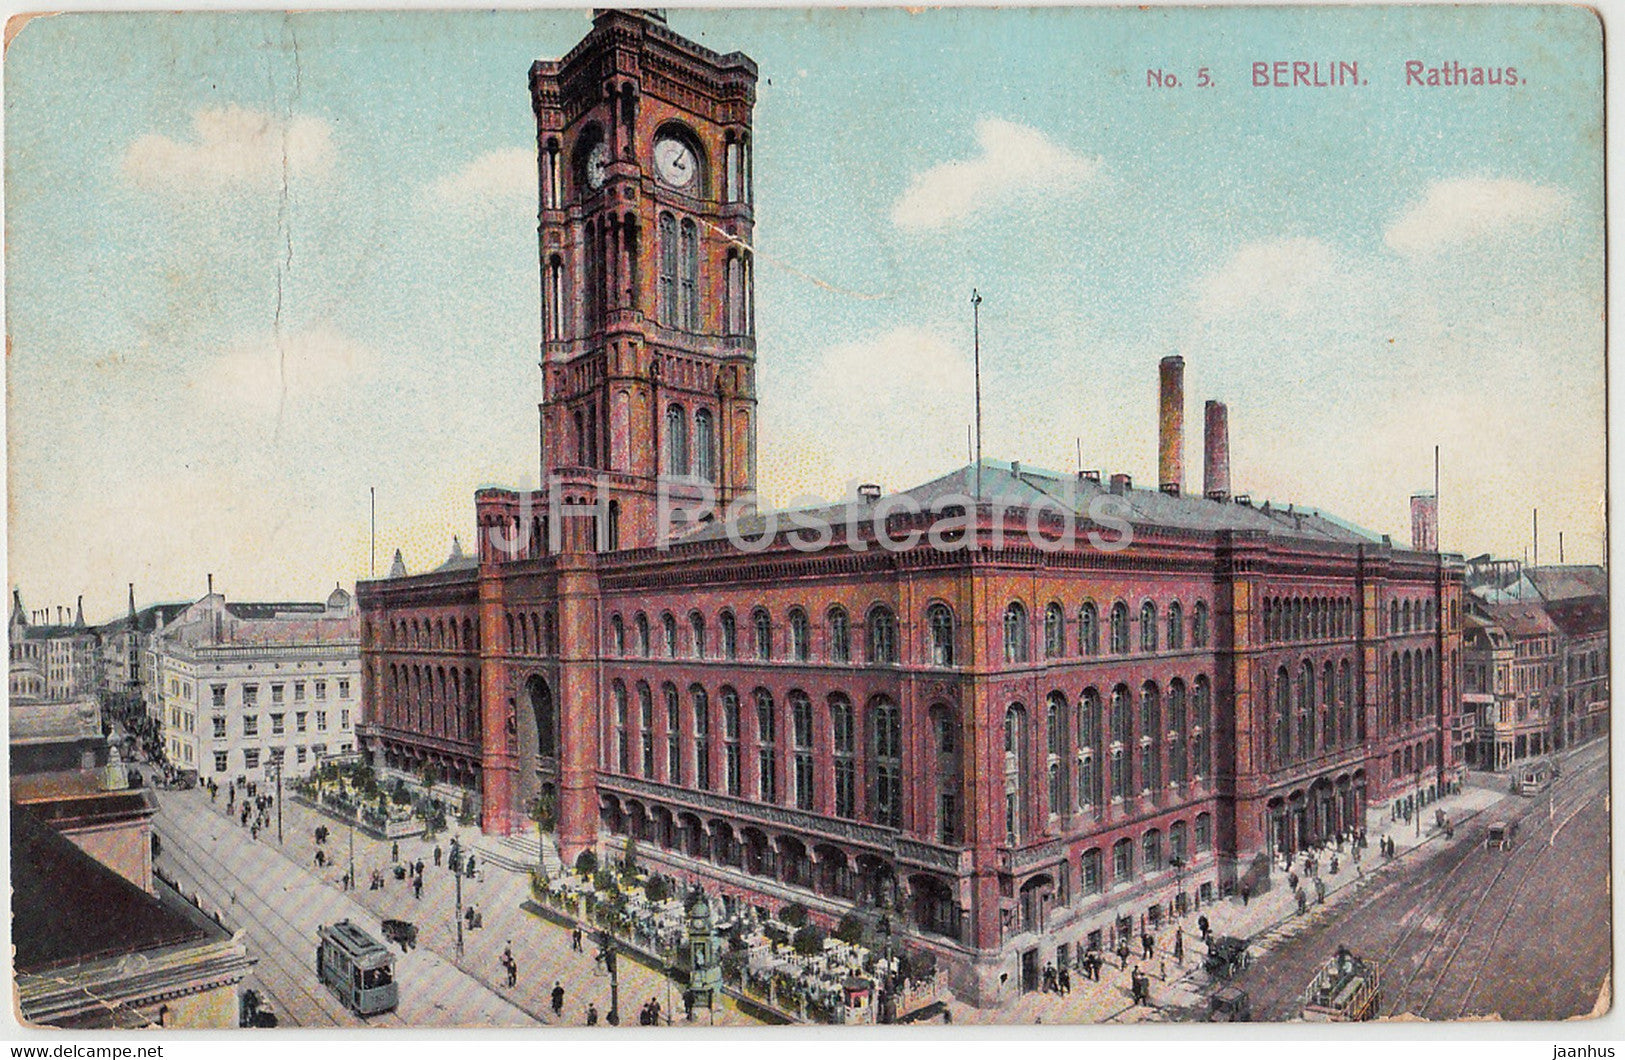 Berlin - Rathaus - Town Hall - tram - 5 - old postcard - 1909 - Germany - used - JH Postcards